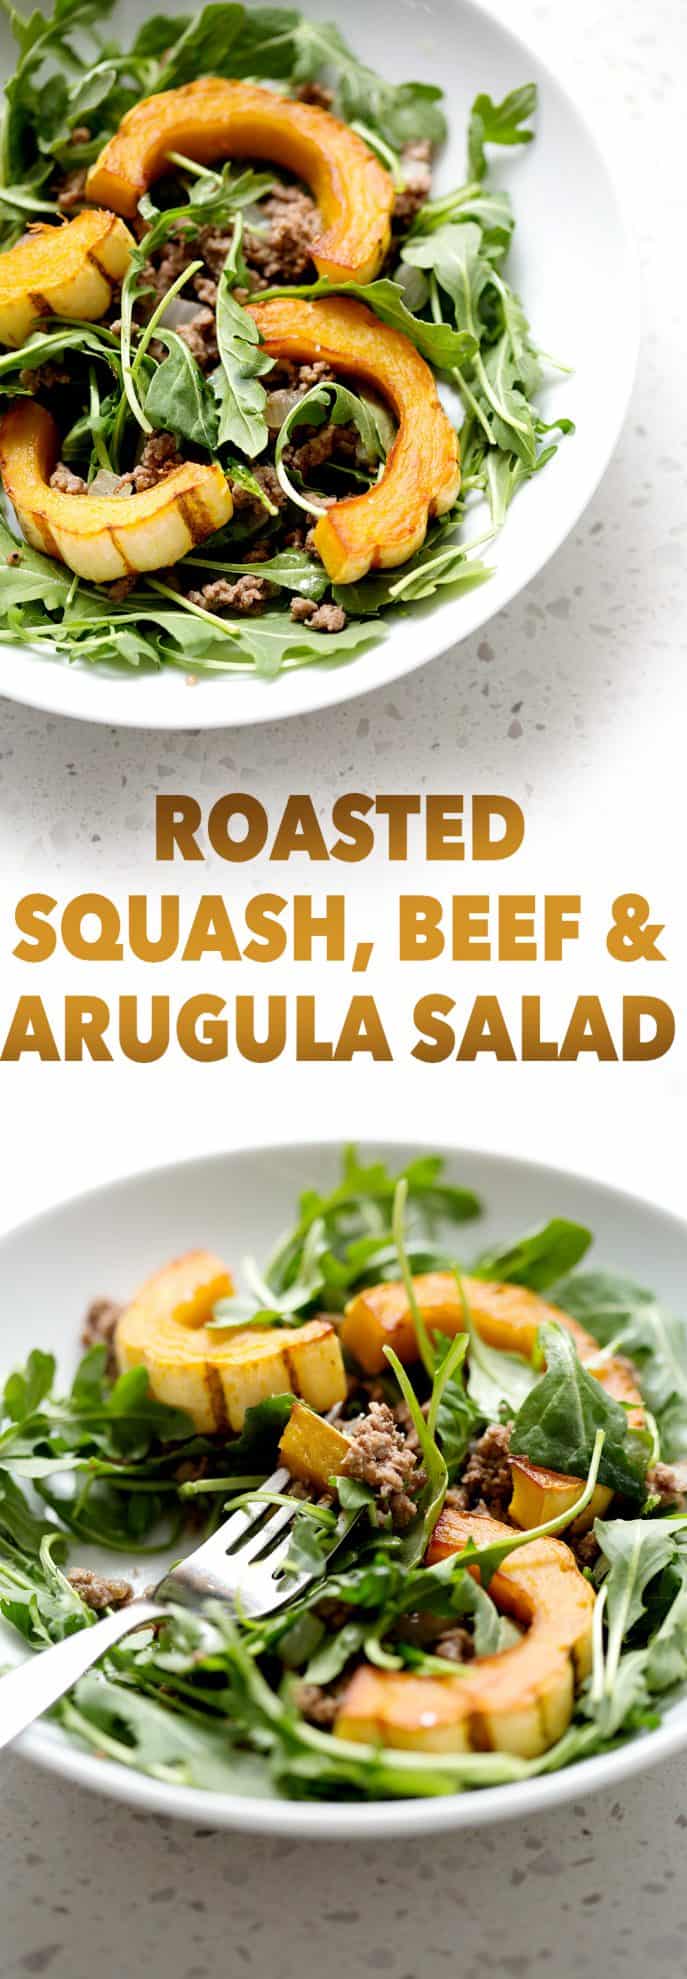 A nutrient dense fall salad that healthy and delicious. The bonus is that this recipe is super easy. You don’t even have to peel the squash, as it’s totally edible! This recipe is allergy friendly (gluten, dairy, shellfish, nut, egg, and soy free) and suits the autoimmune protocol (AIP) and paleo diets.